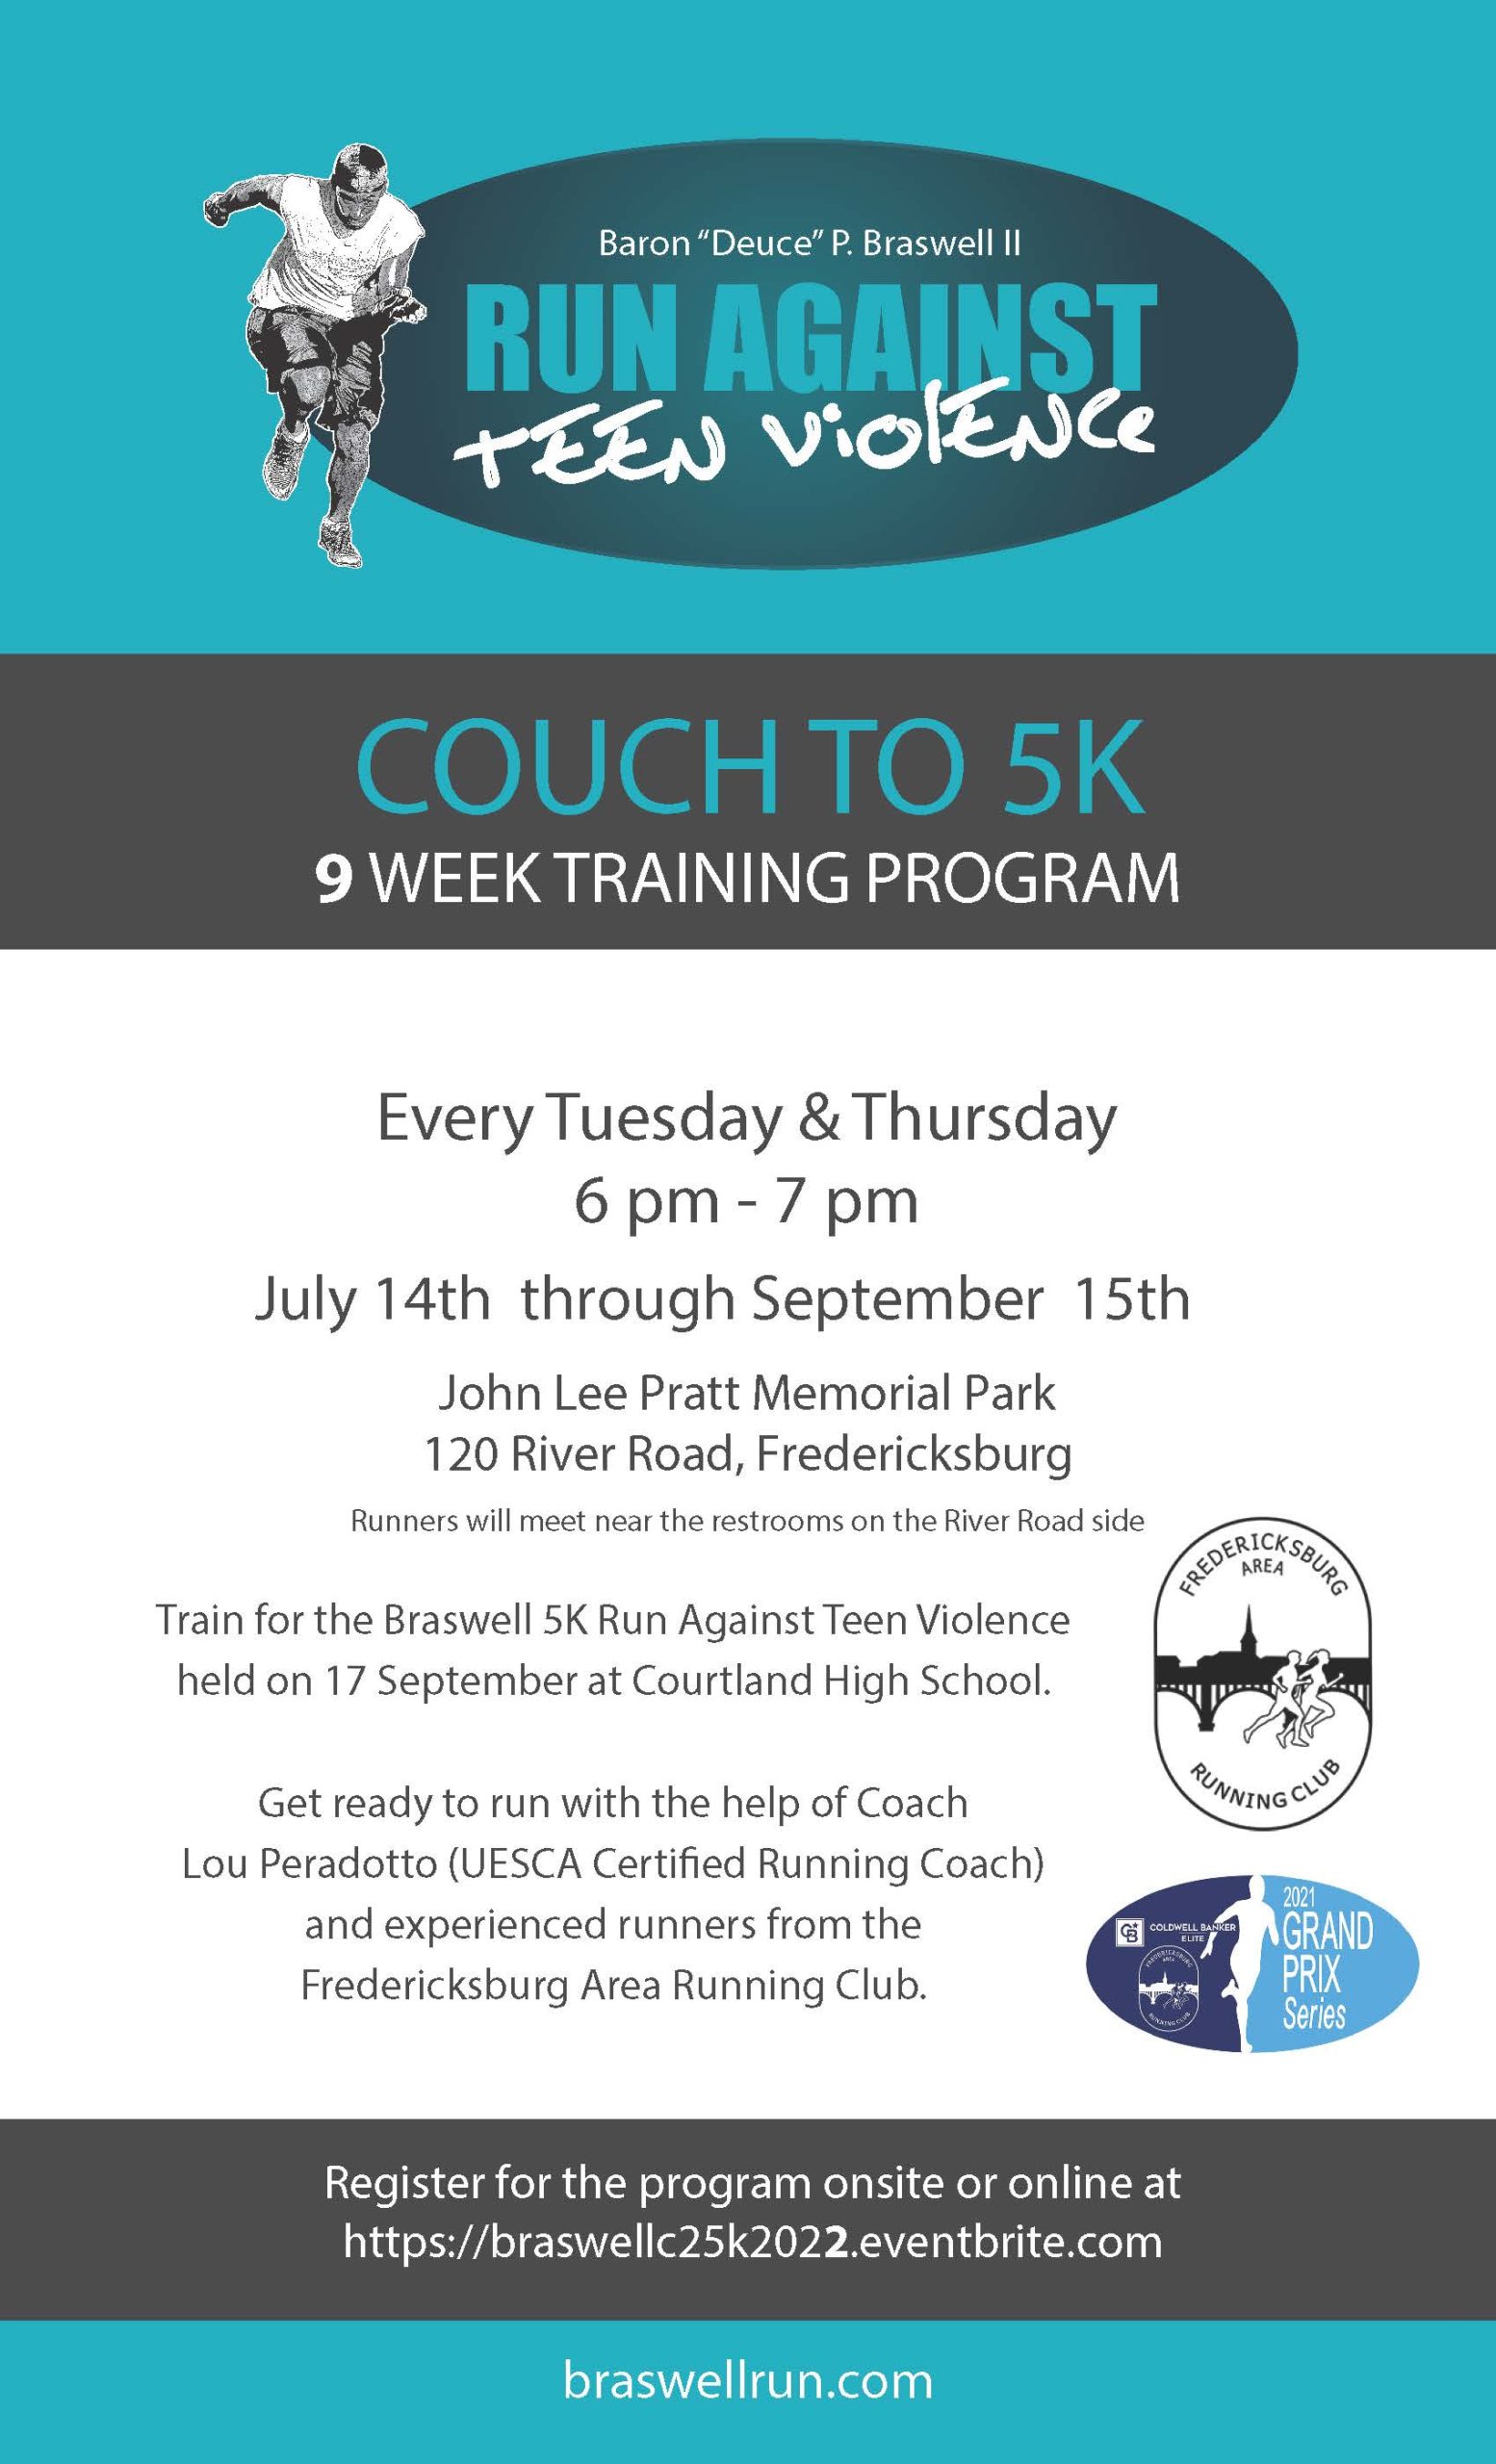 Couch 2 5k Flyer